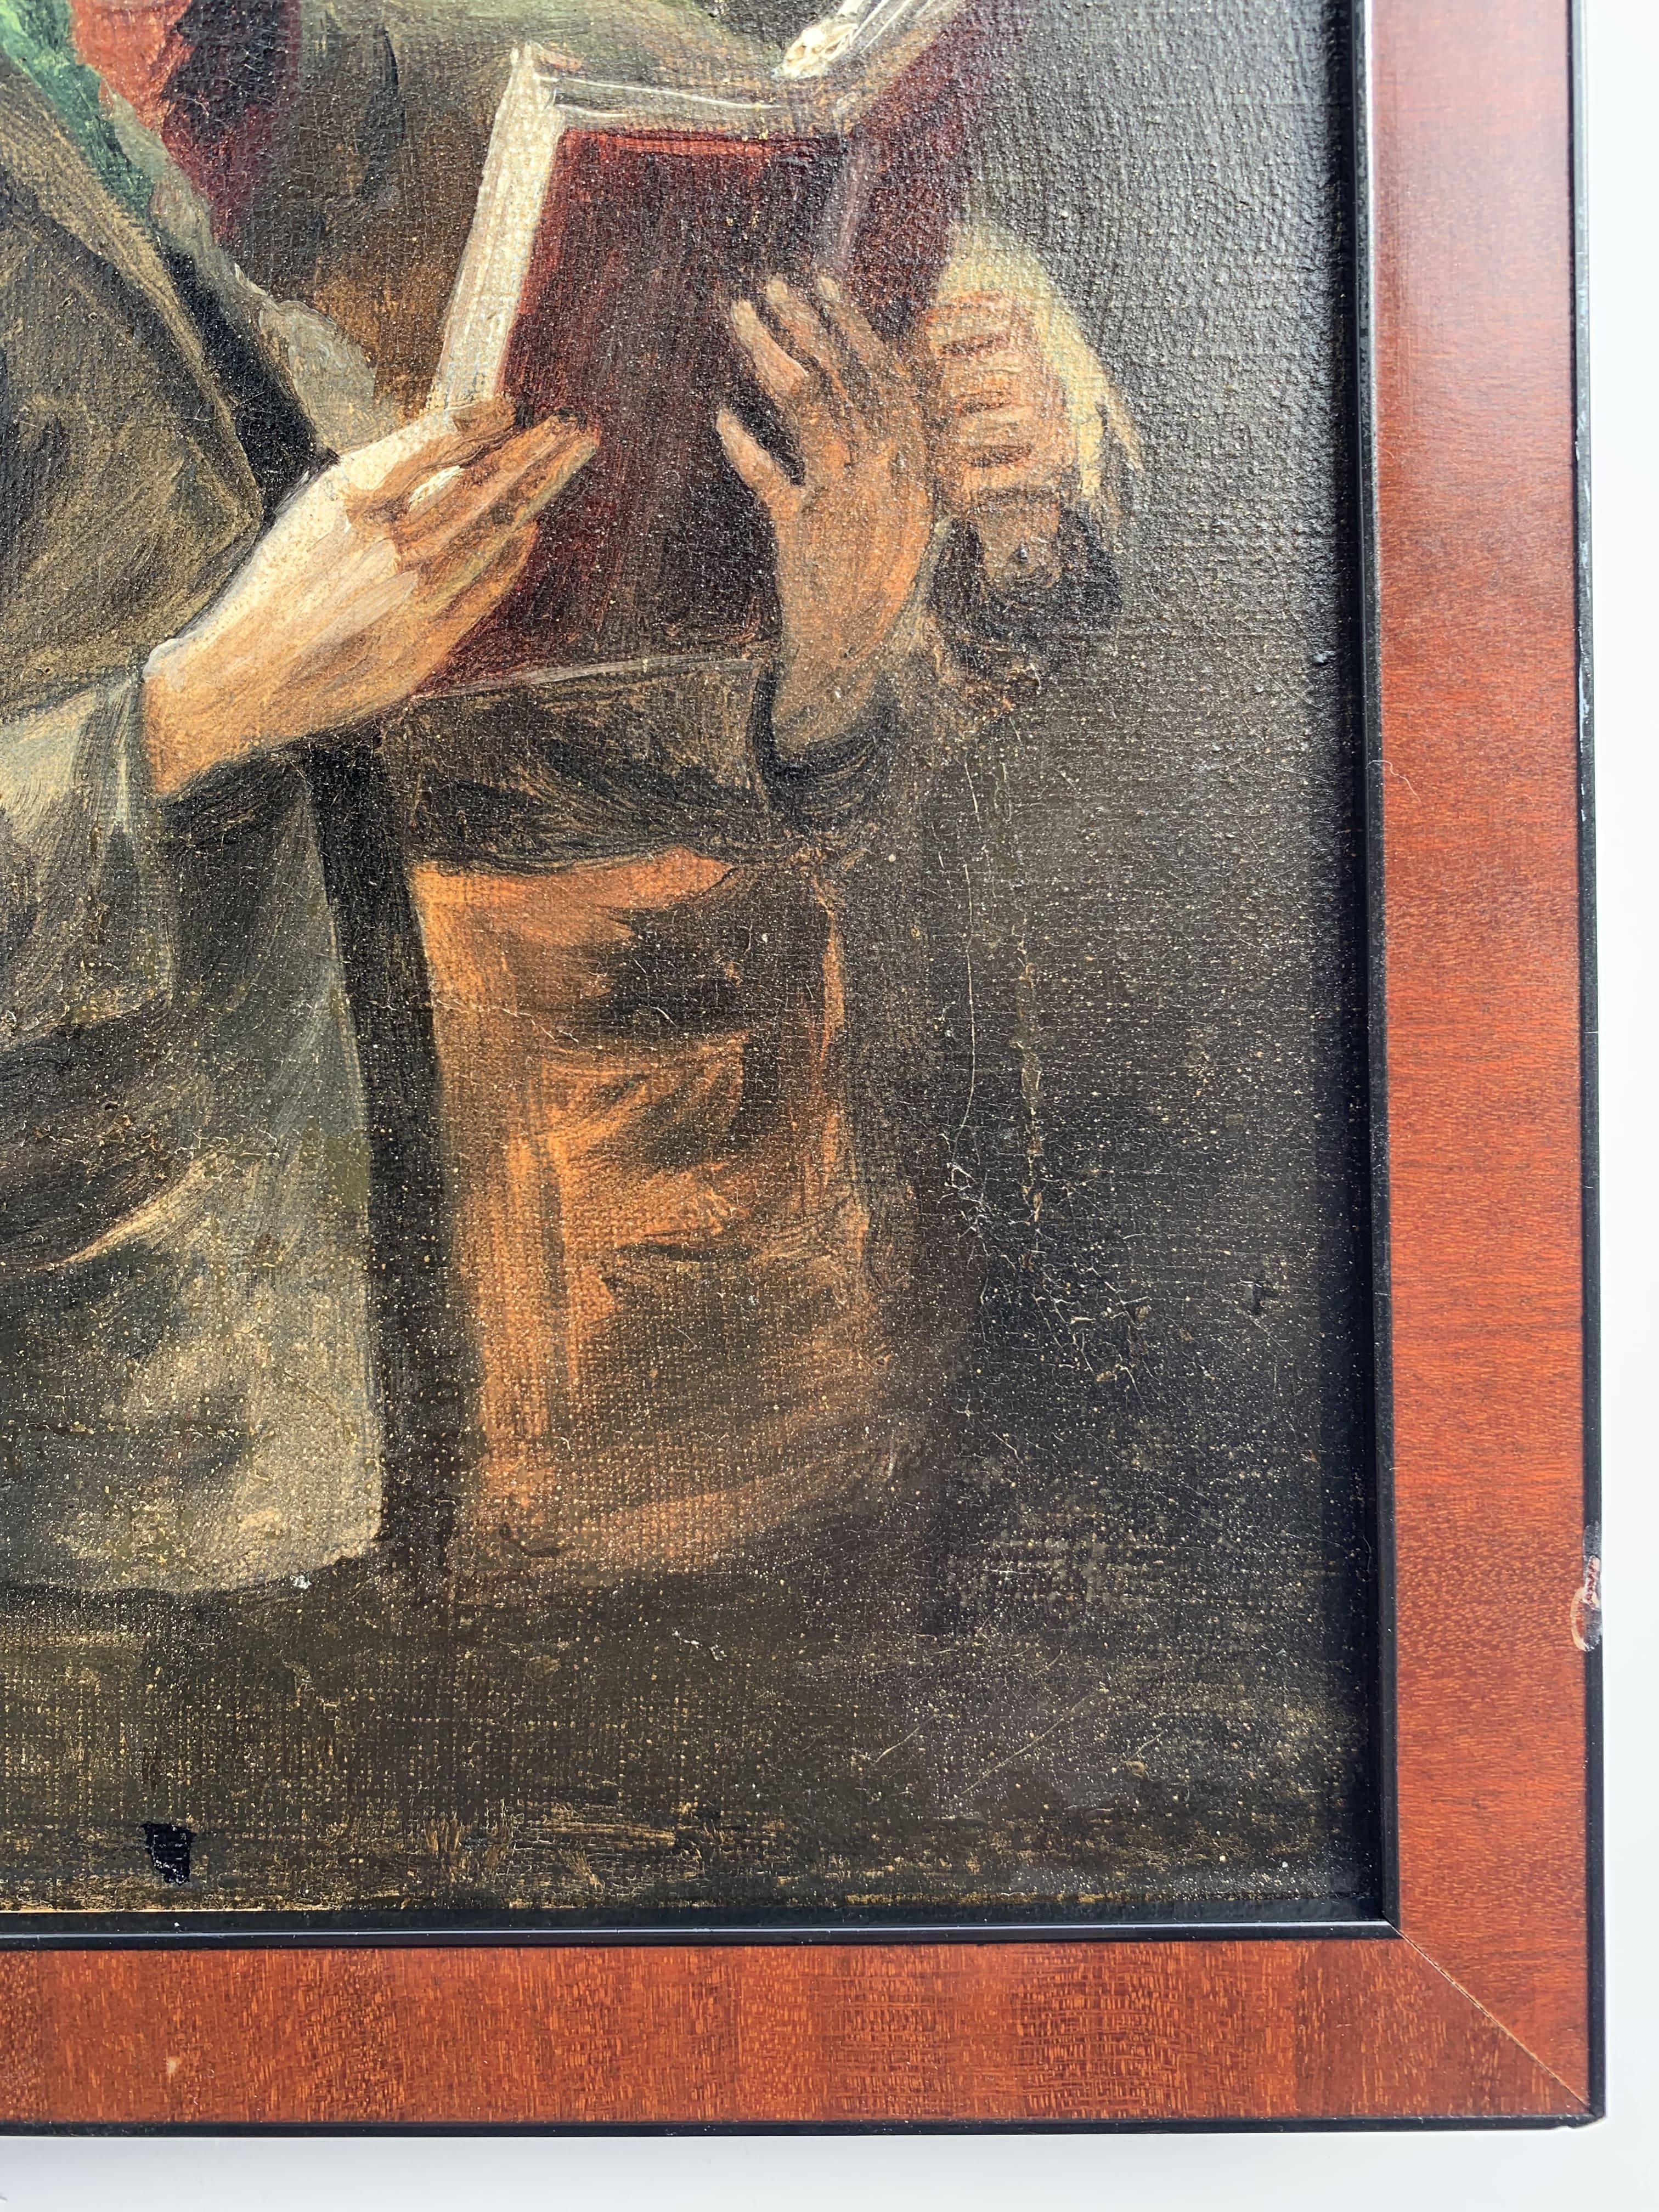 Up for sale is an interesting antique/vintage original oil painting on canvas, depicting a genre scene - two young men are reading a book.

Signed in the lower-left corner, but is difficult to read. Nicely framed.

Dimensions (frame): 11 